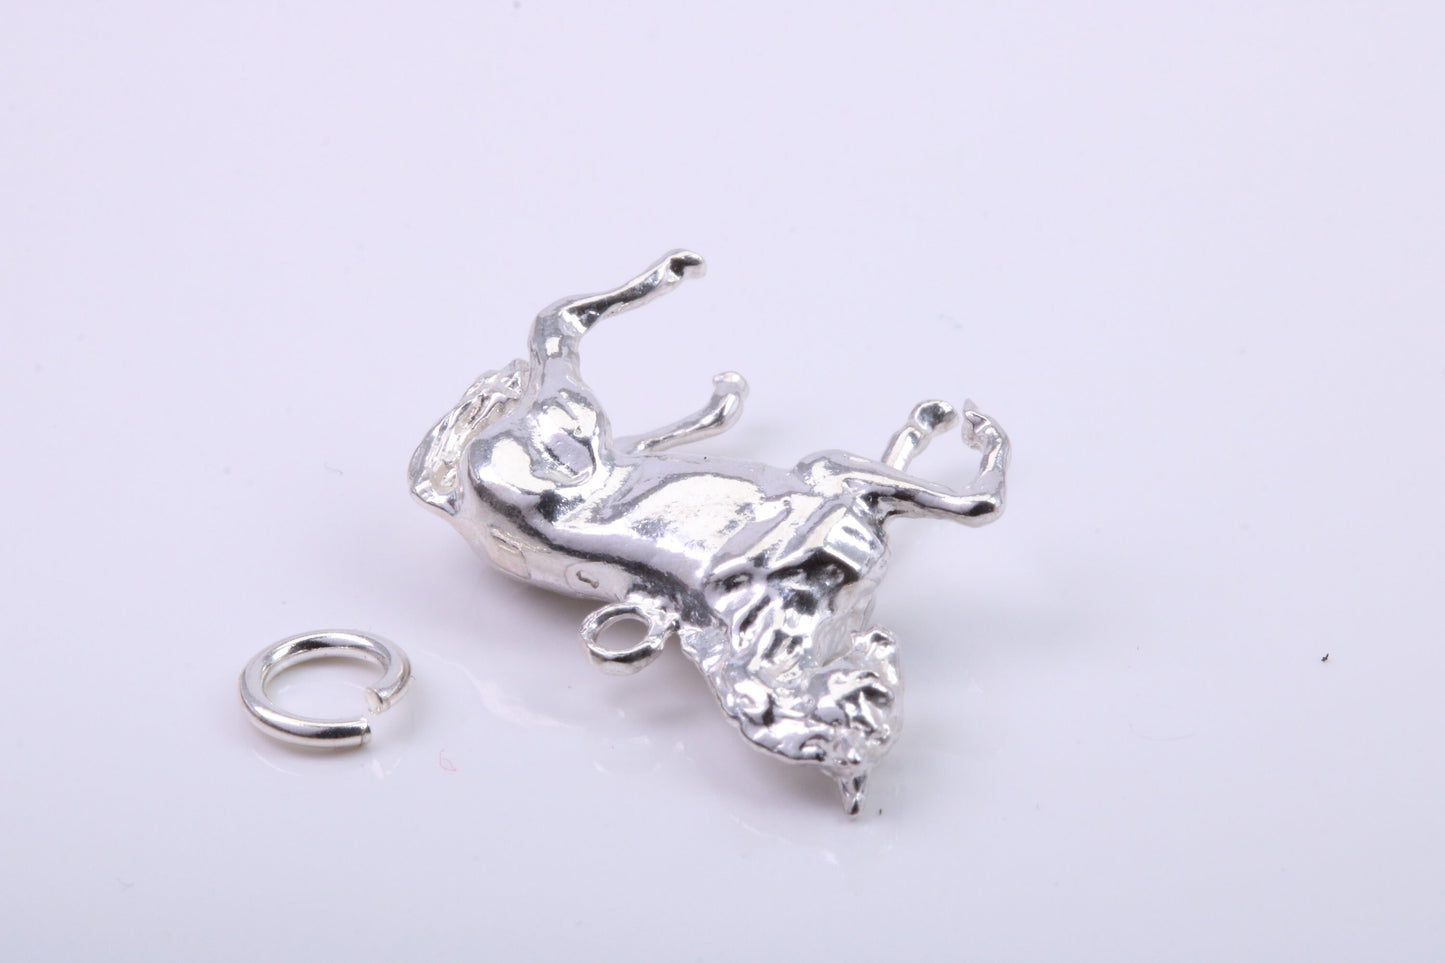 Stallion Charm, Traditional Charm, Made from Solid 925 Grade Sterling Silver, Complete with Attachment Link